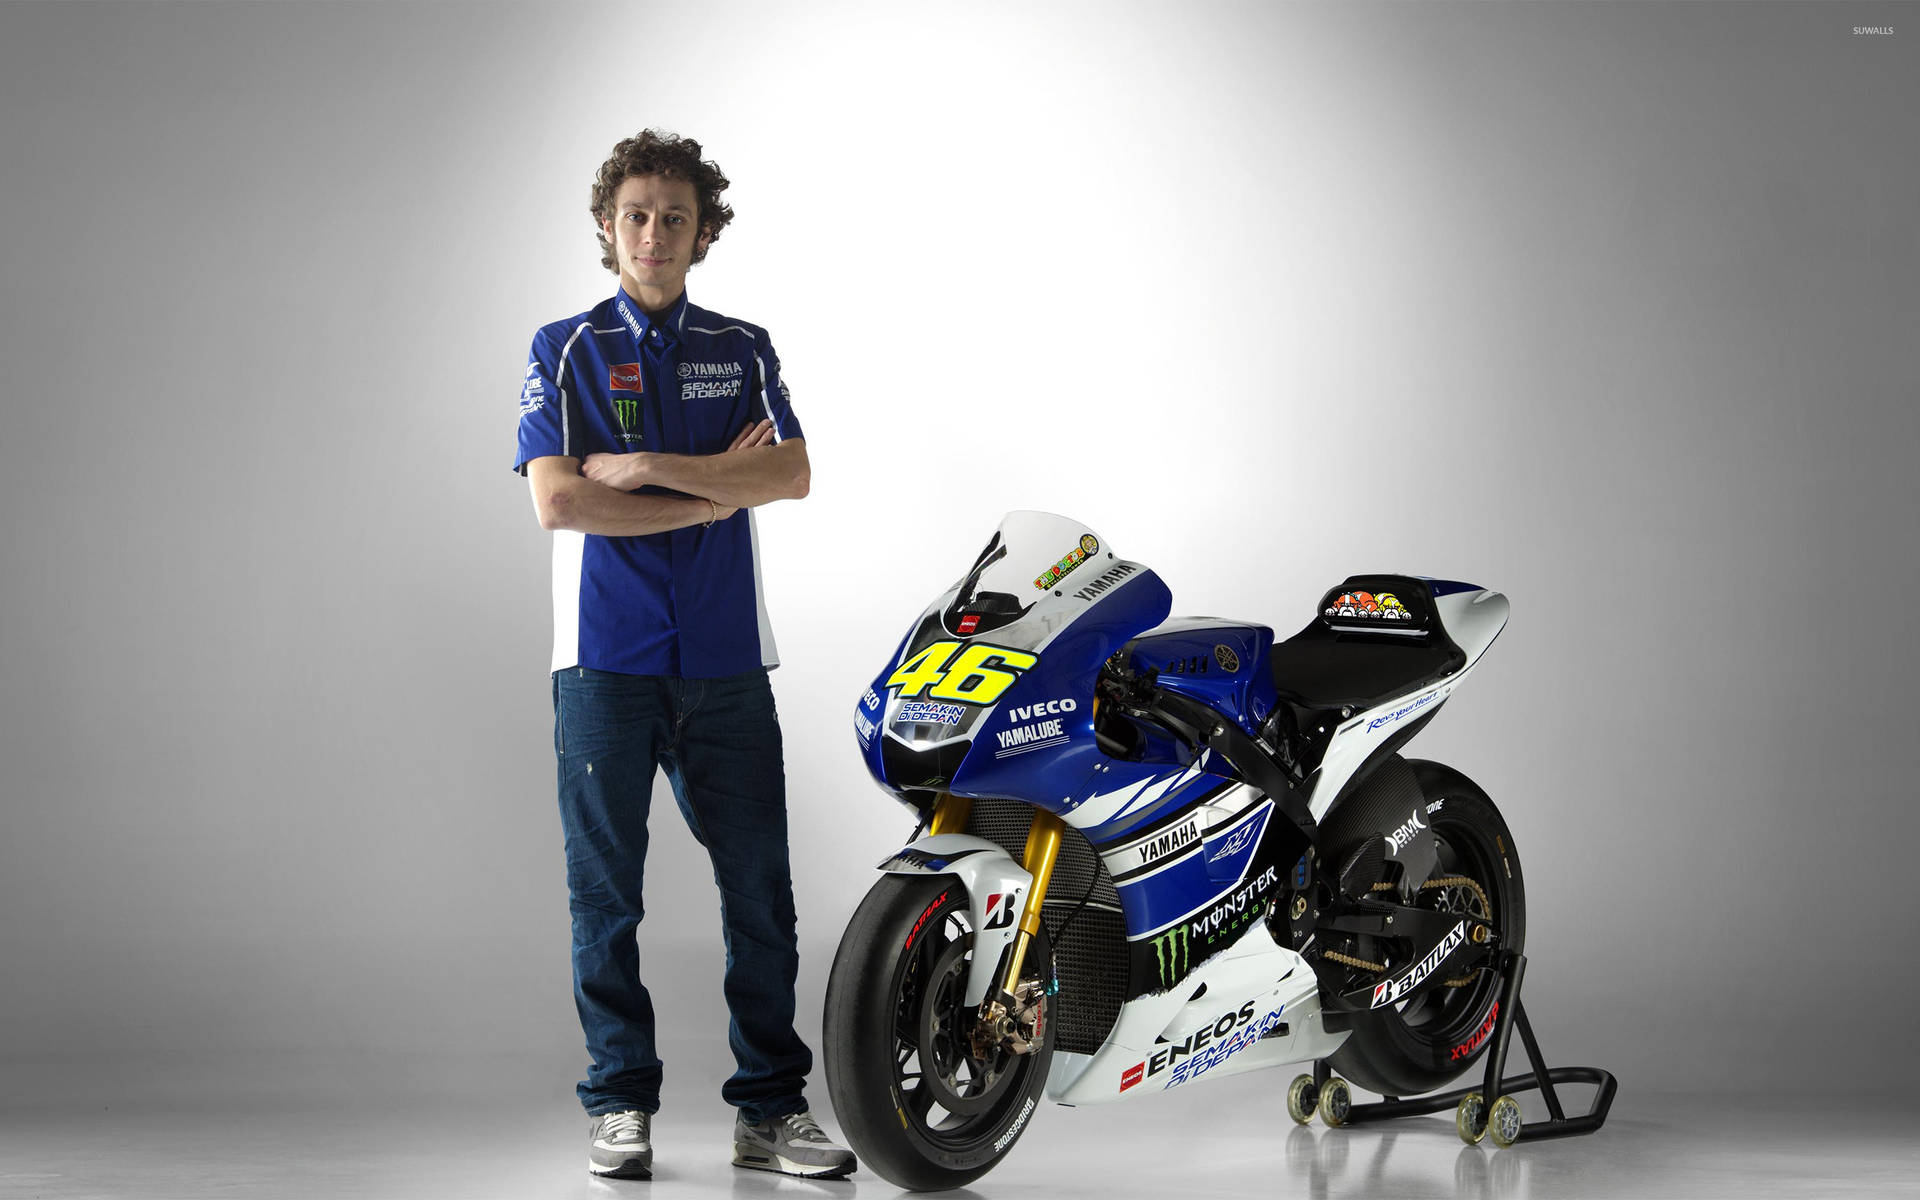 Valentino Rossi in action during a Yamaha team race. Wallpaper